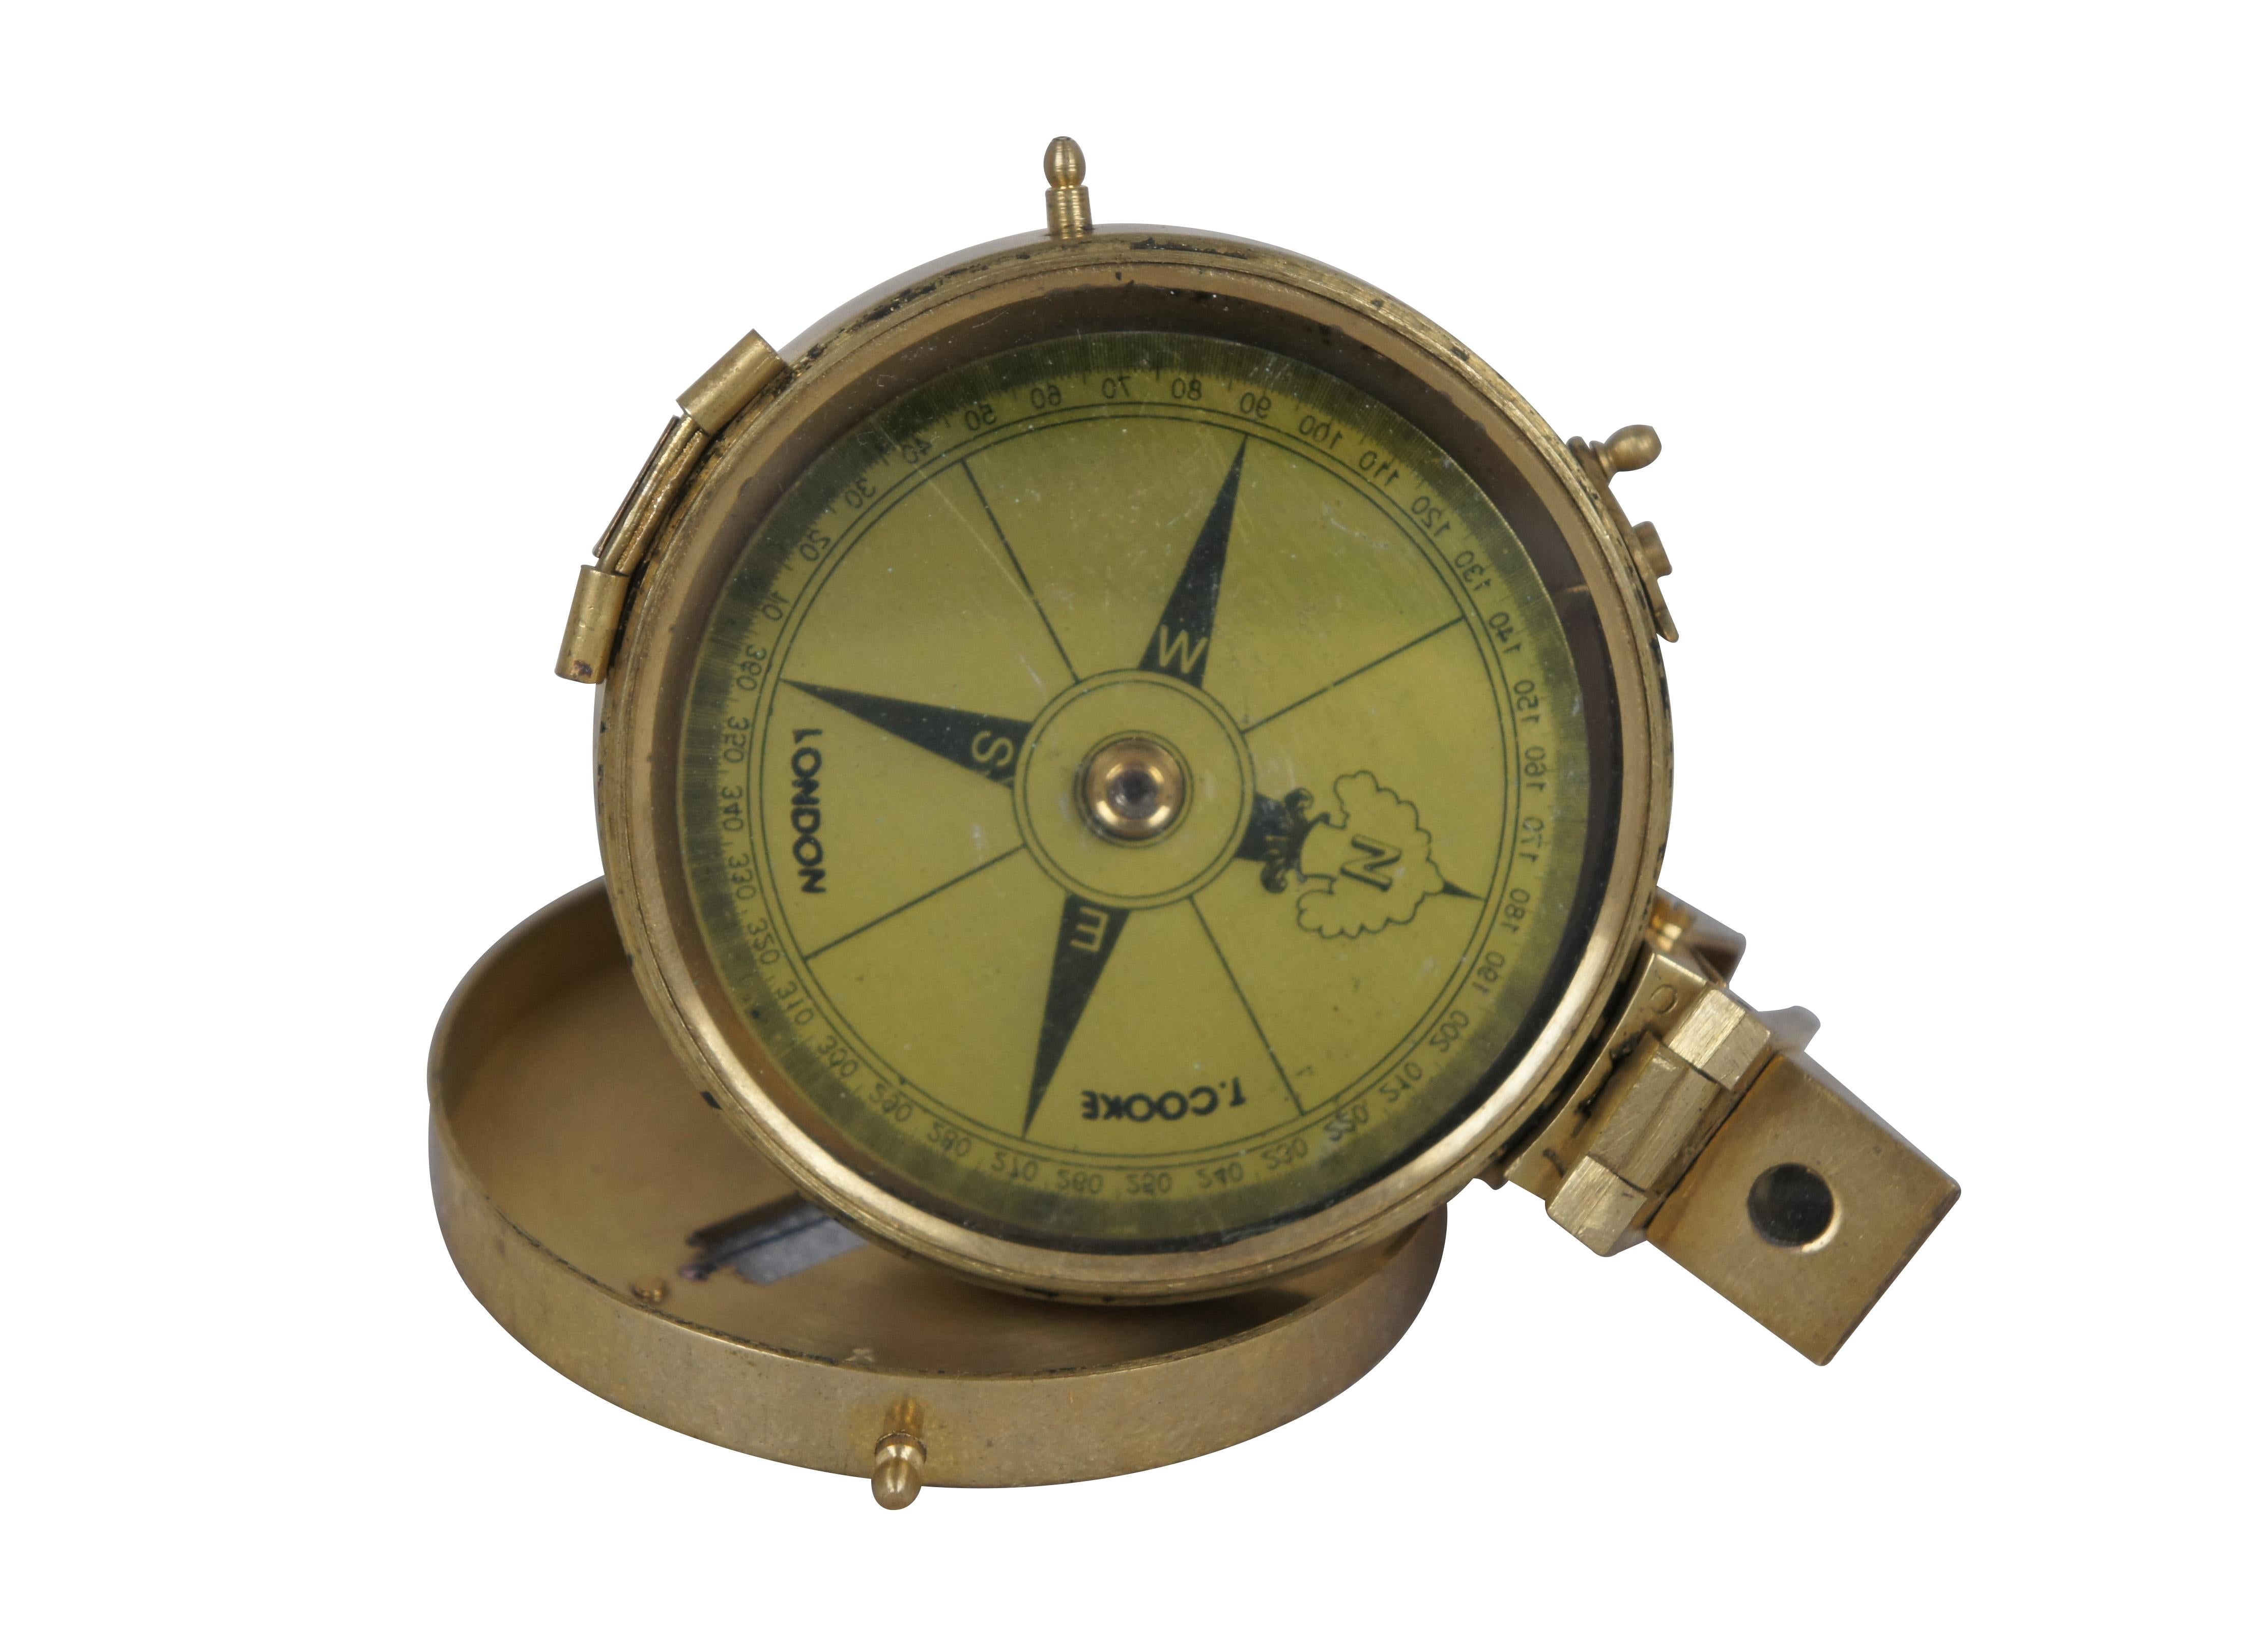 Vintage T. Cooke of London prismatic compass. Brass case with pierced sight line in the lid, folding prism, metallic gold tone face, and short stand able to be screwed onto a tripod for stabilization.

